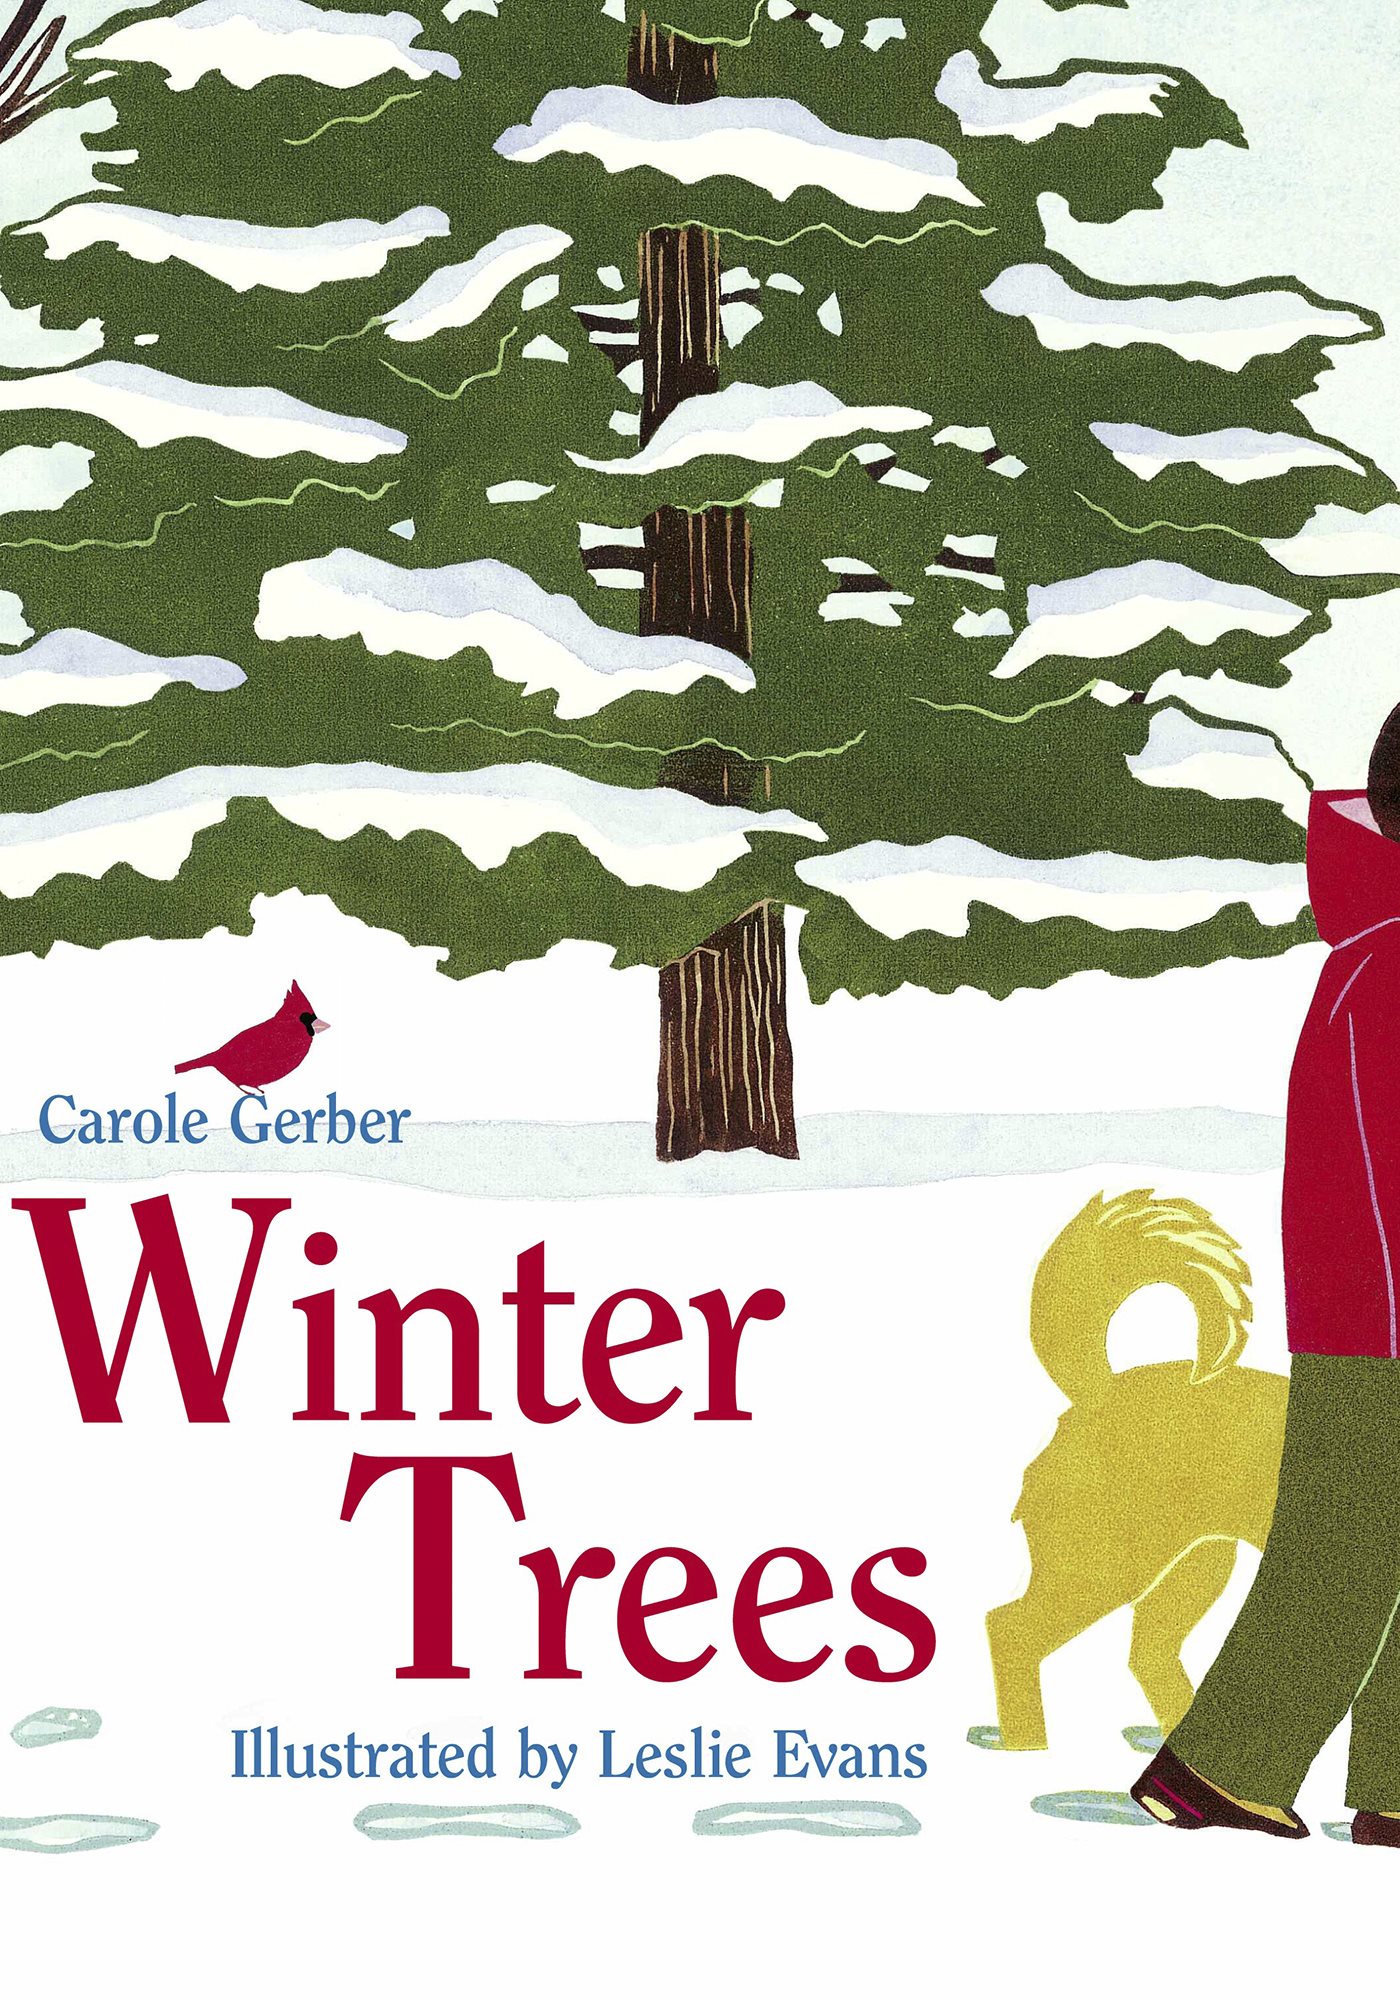 Carole Gerber Winter Trees Illustrated by Leslie Evans - photo 1